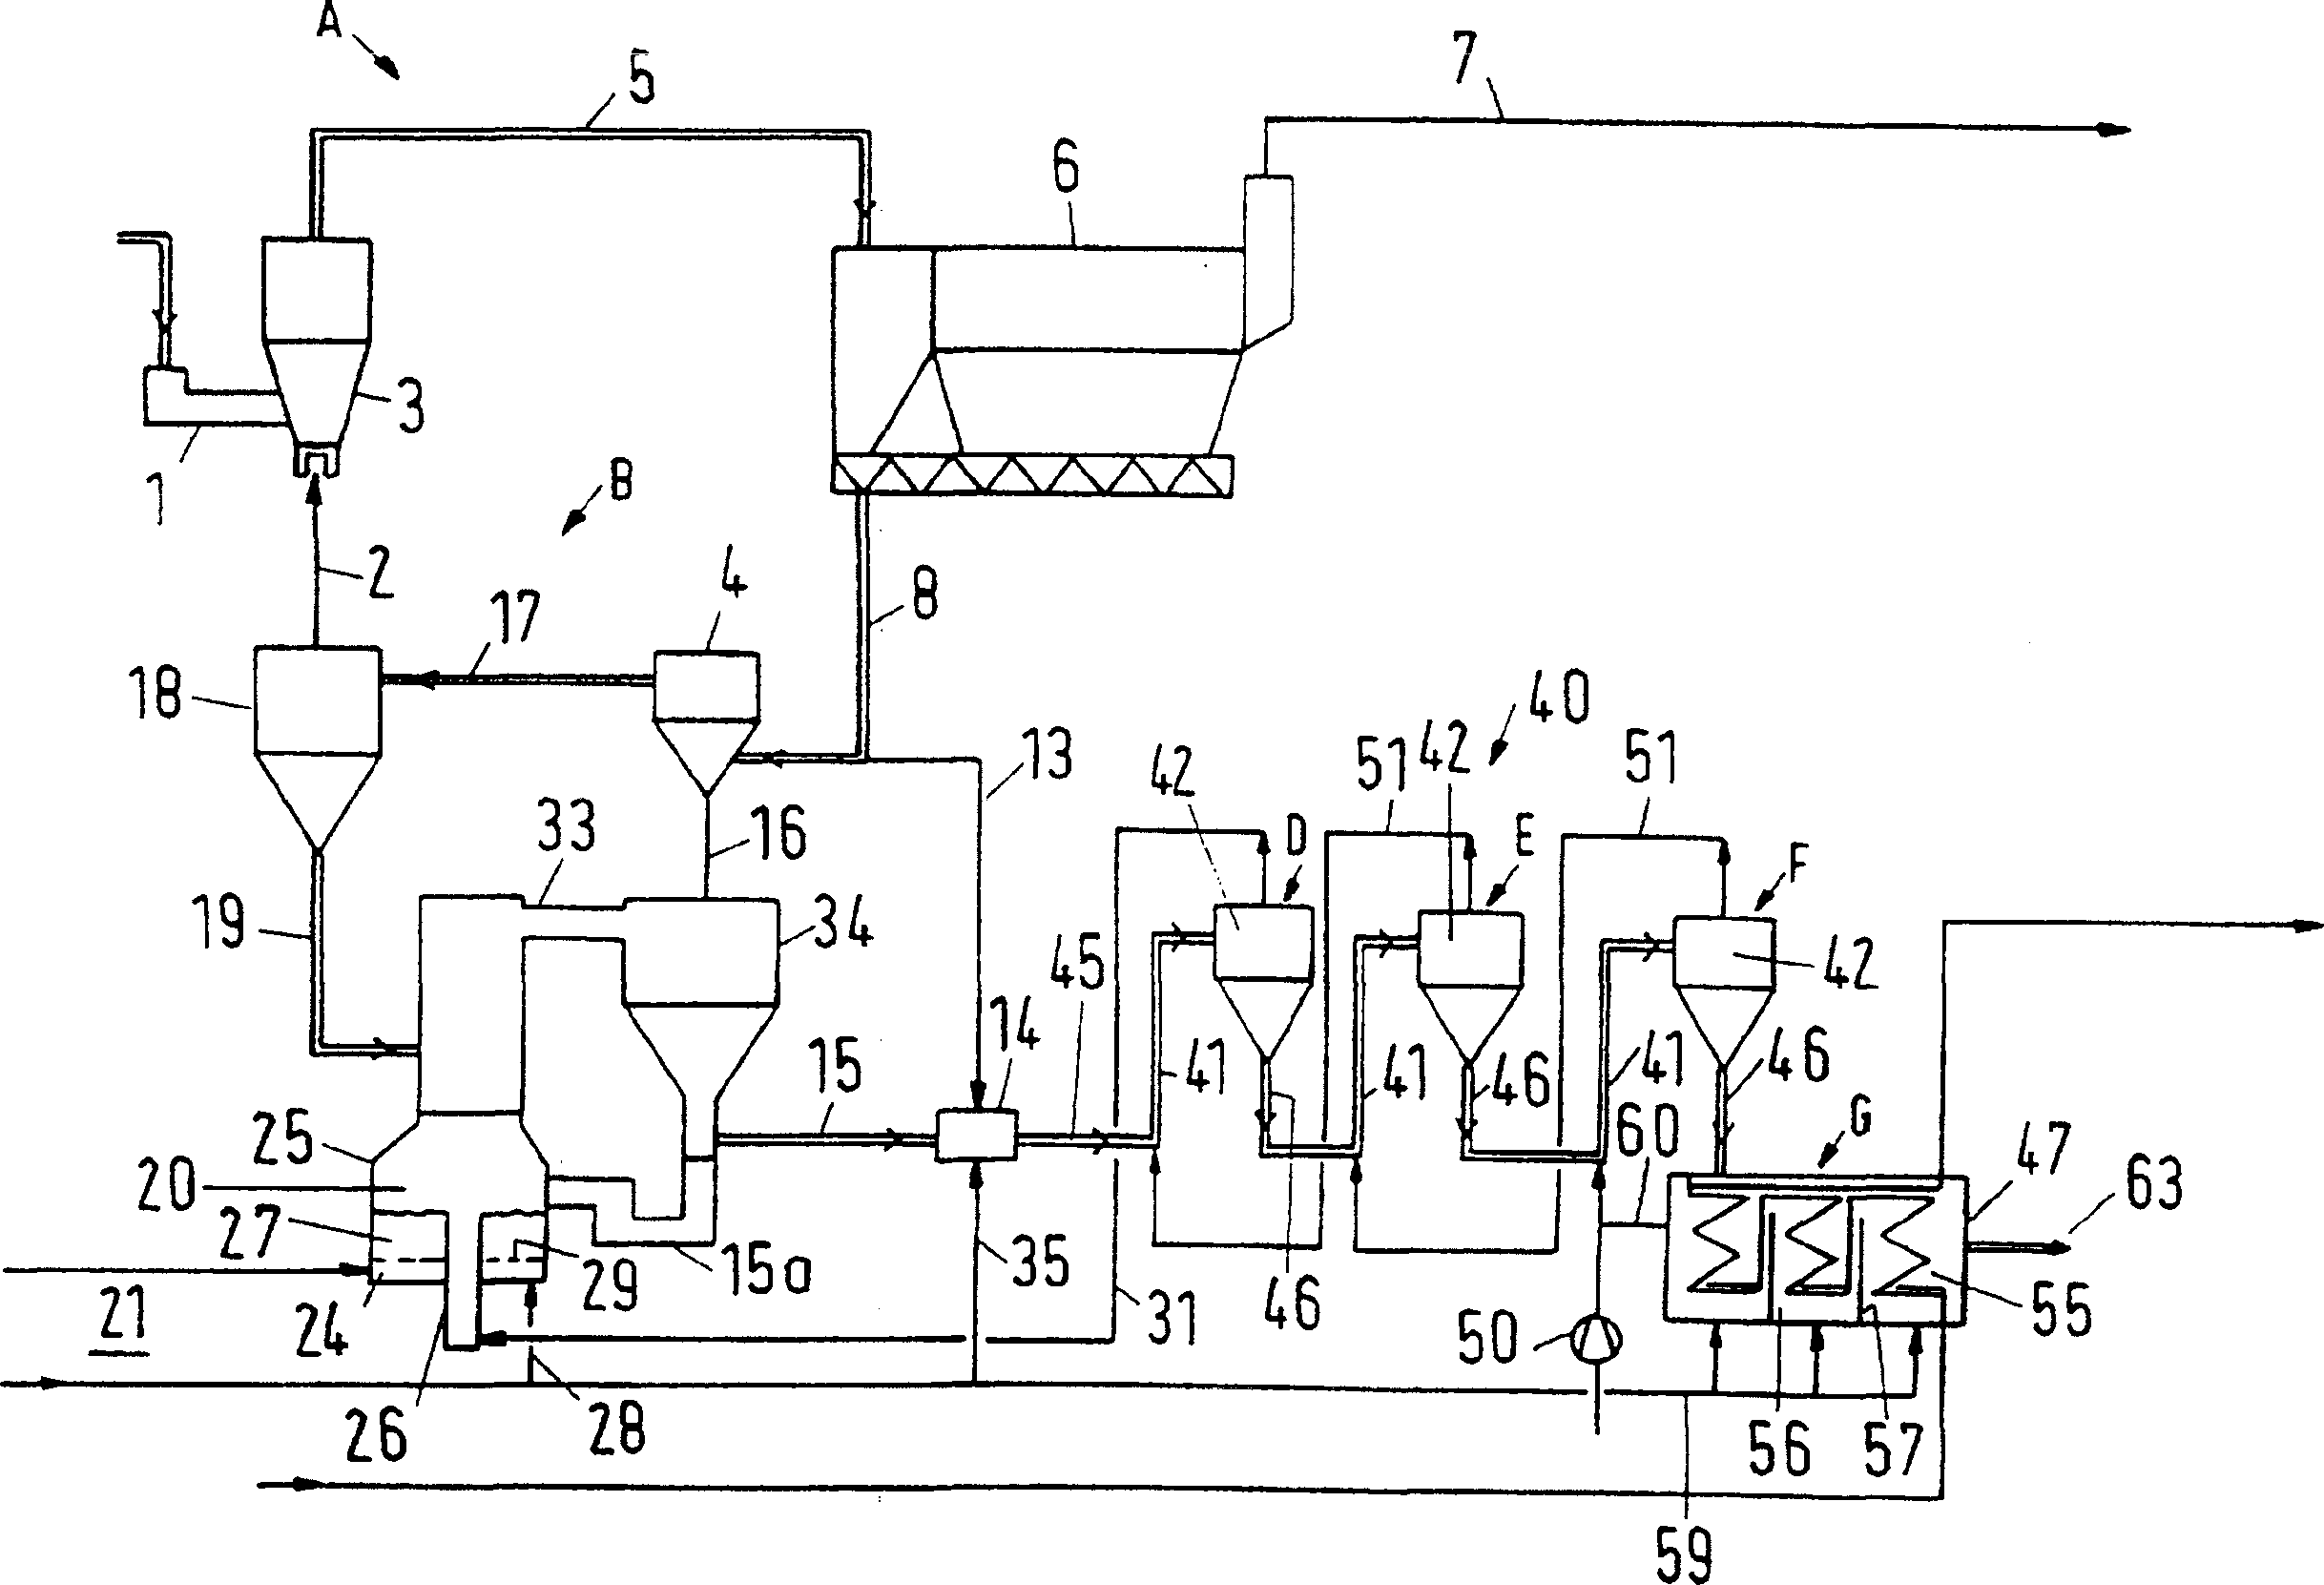 Process and plant for producing metal oxide from metal compounds